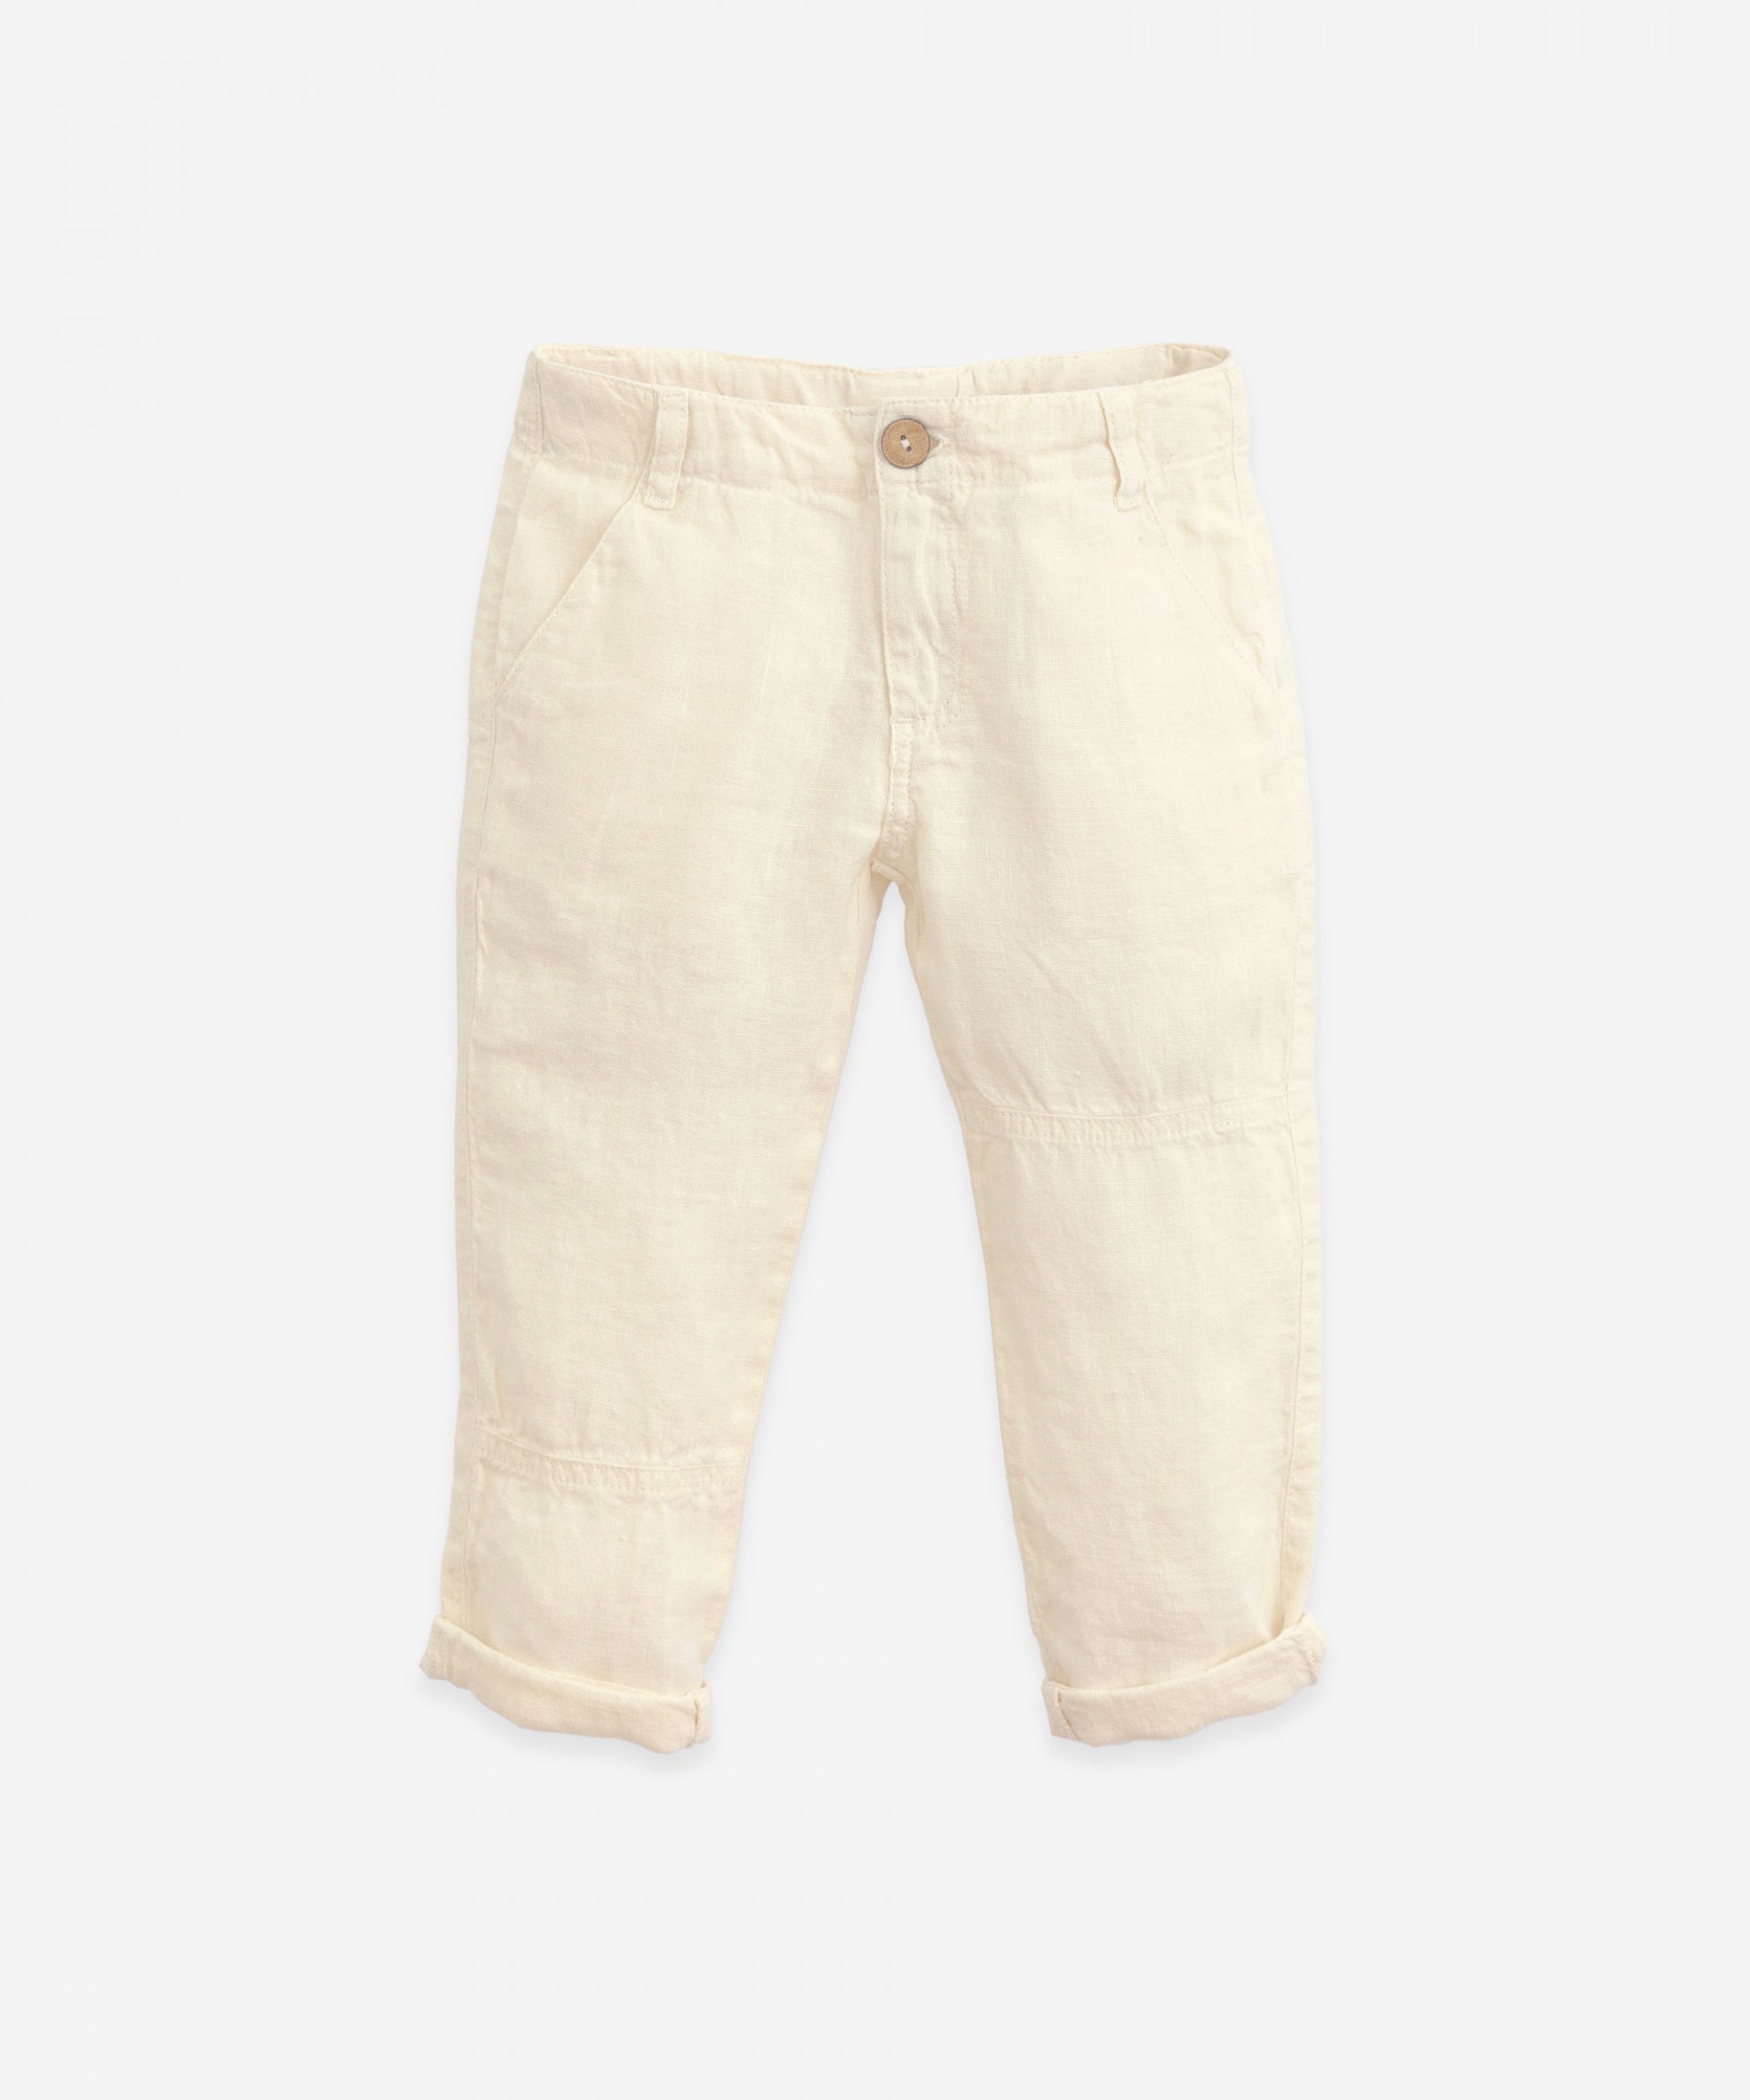 Boys Linen Pant at Best Price in India